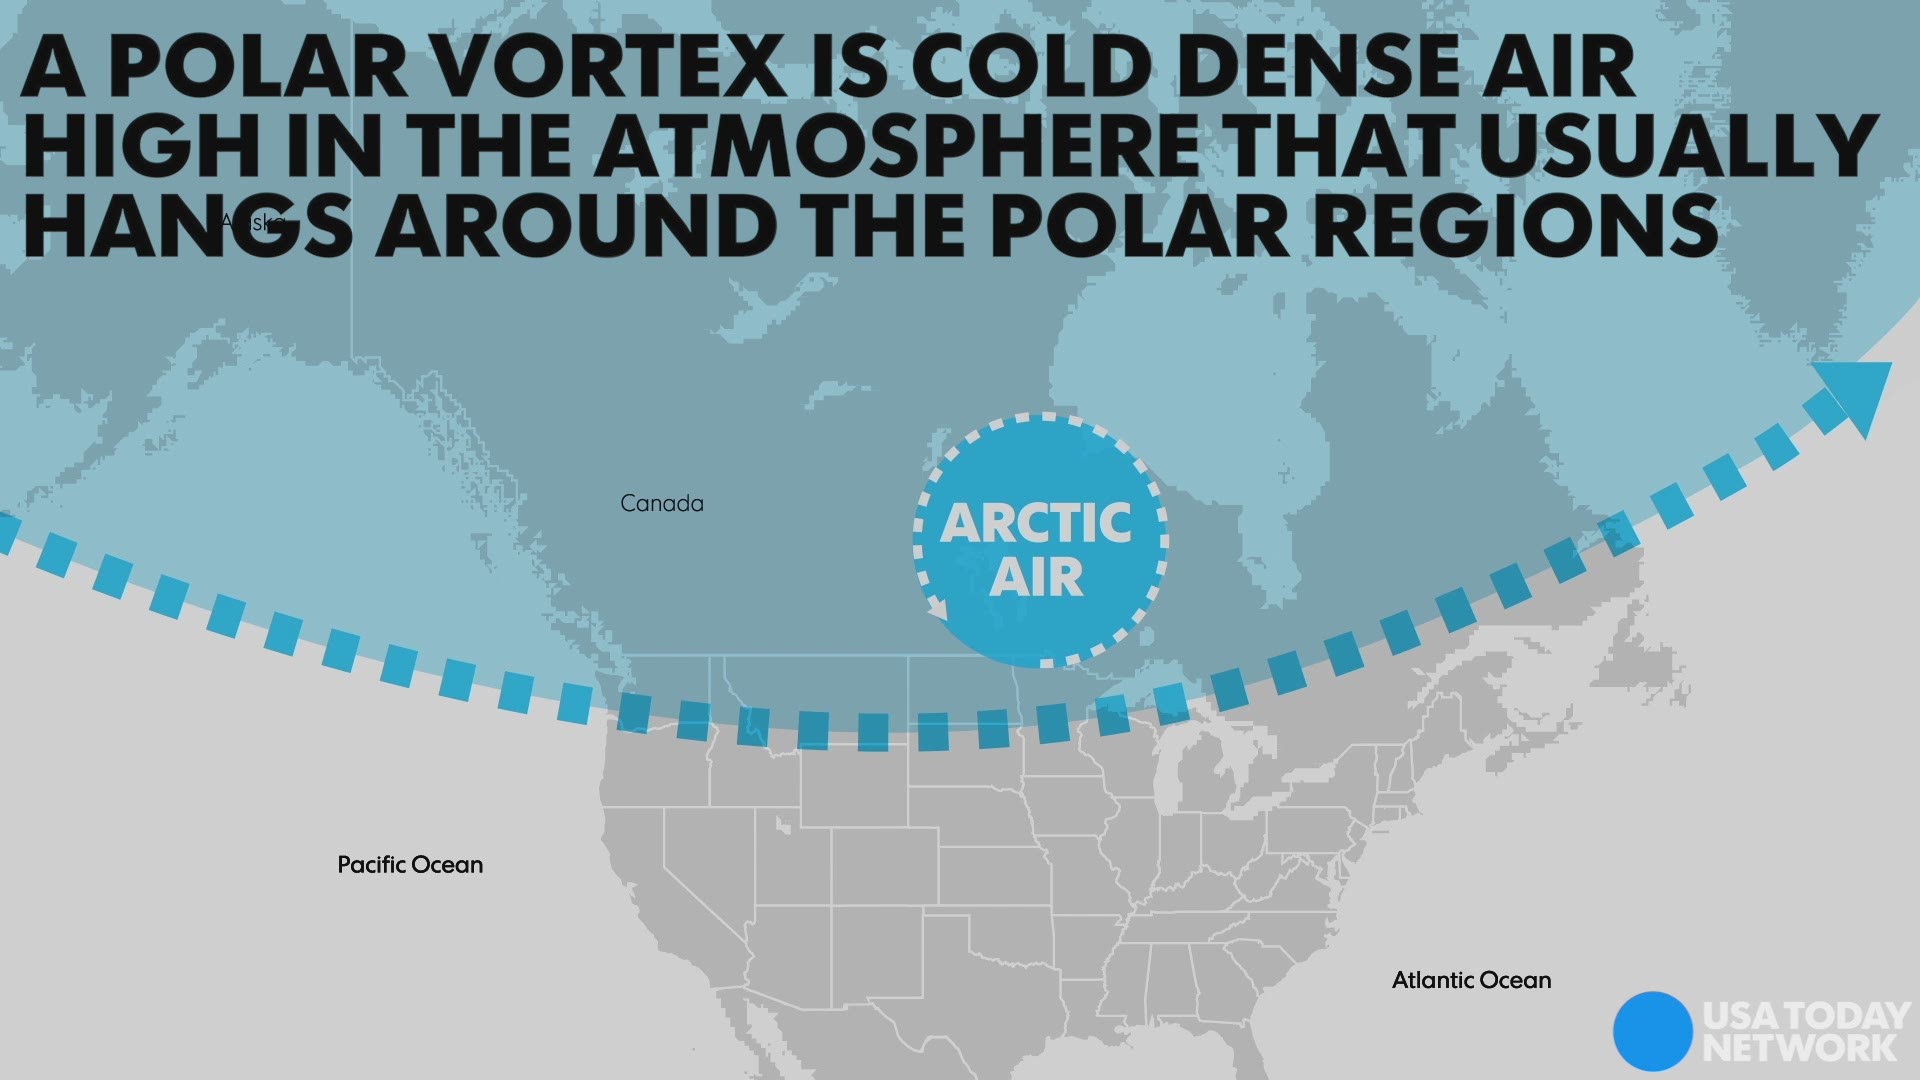 Take a look at what a polar vortex is and why it causes such bitter cold temperatures.